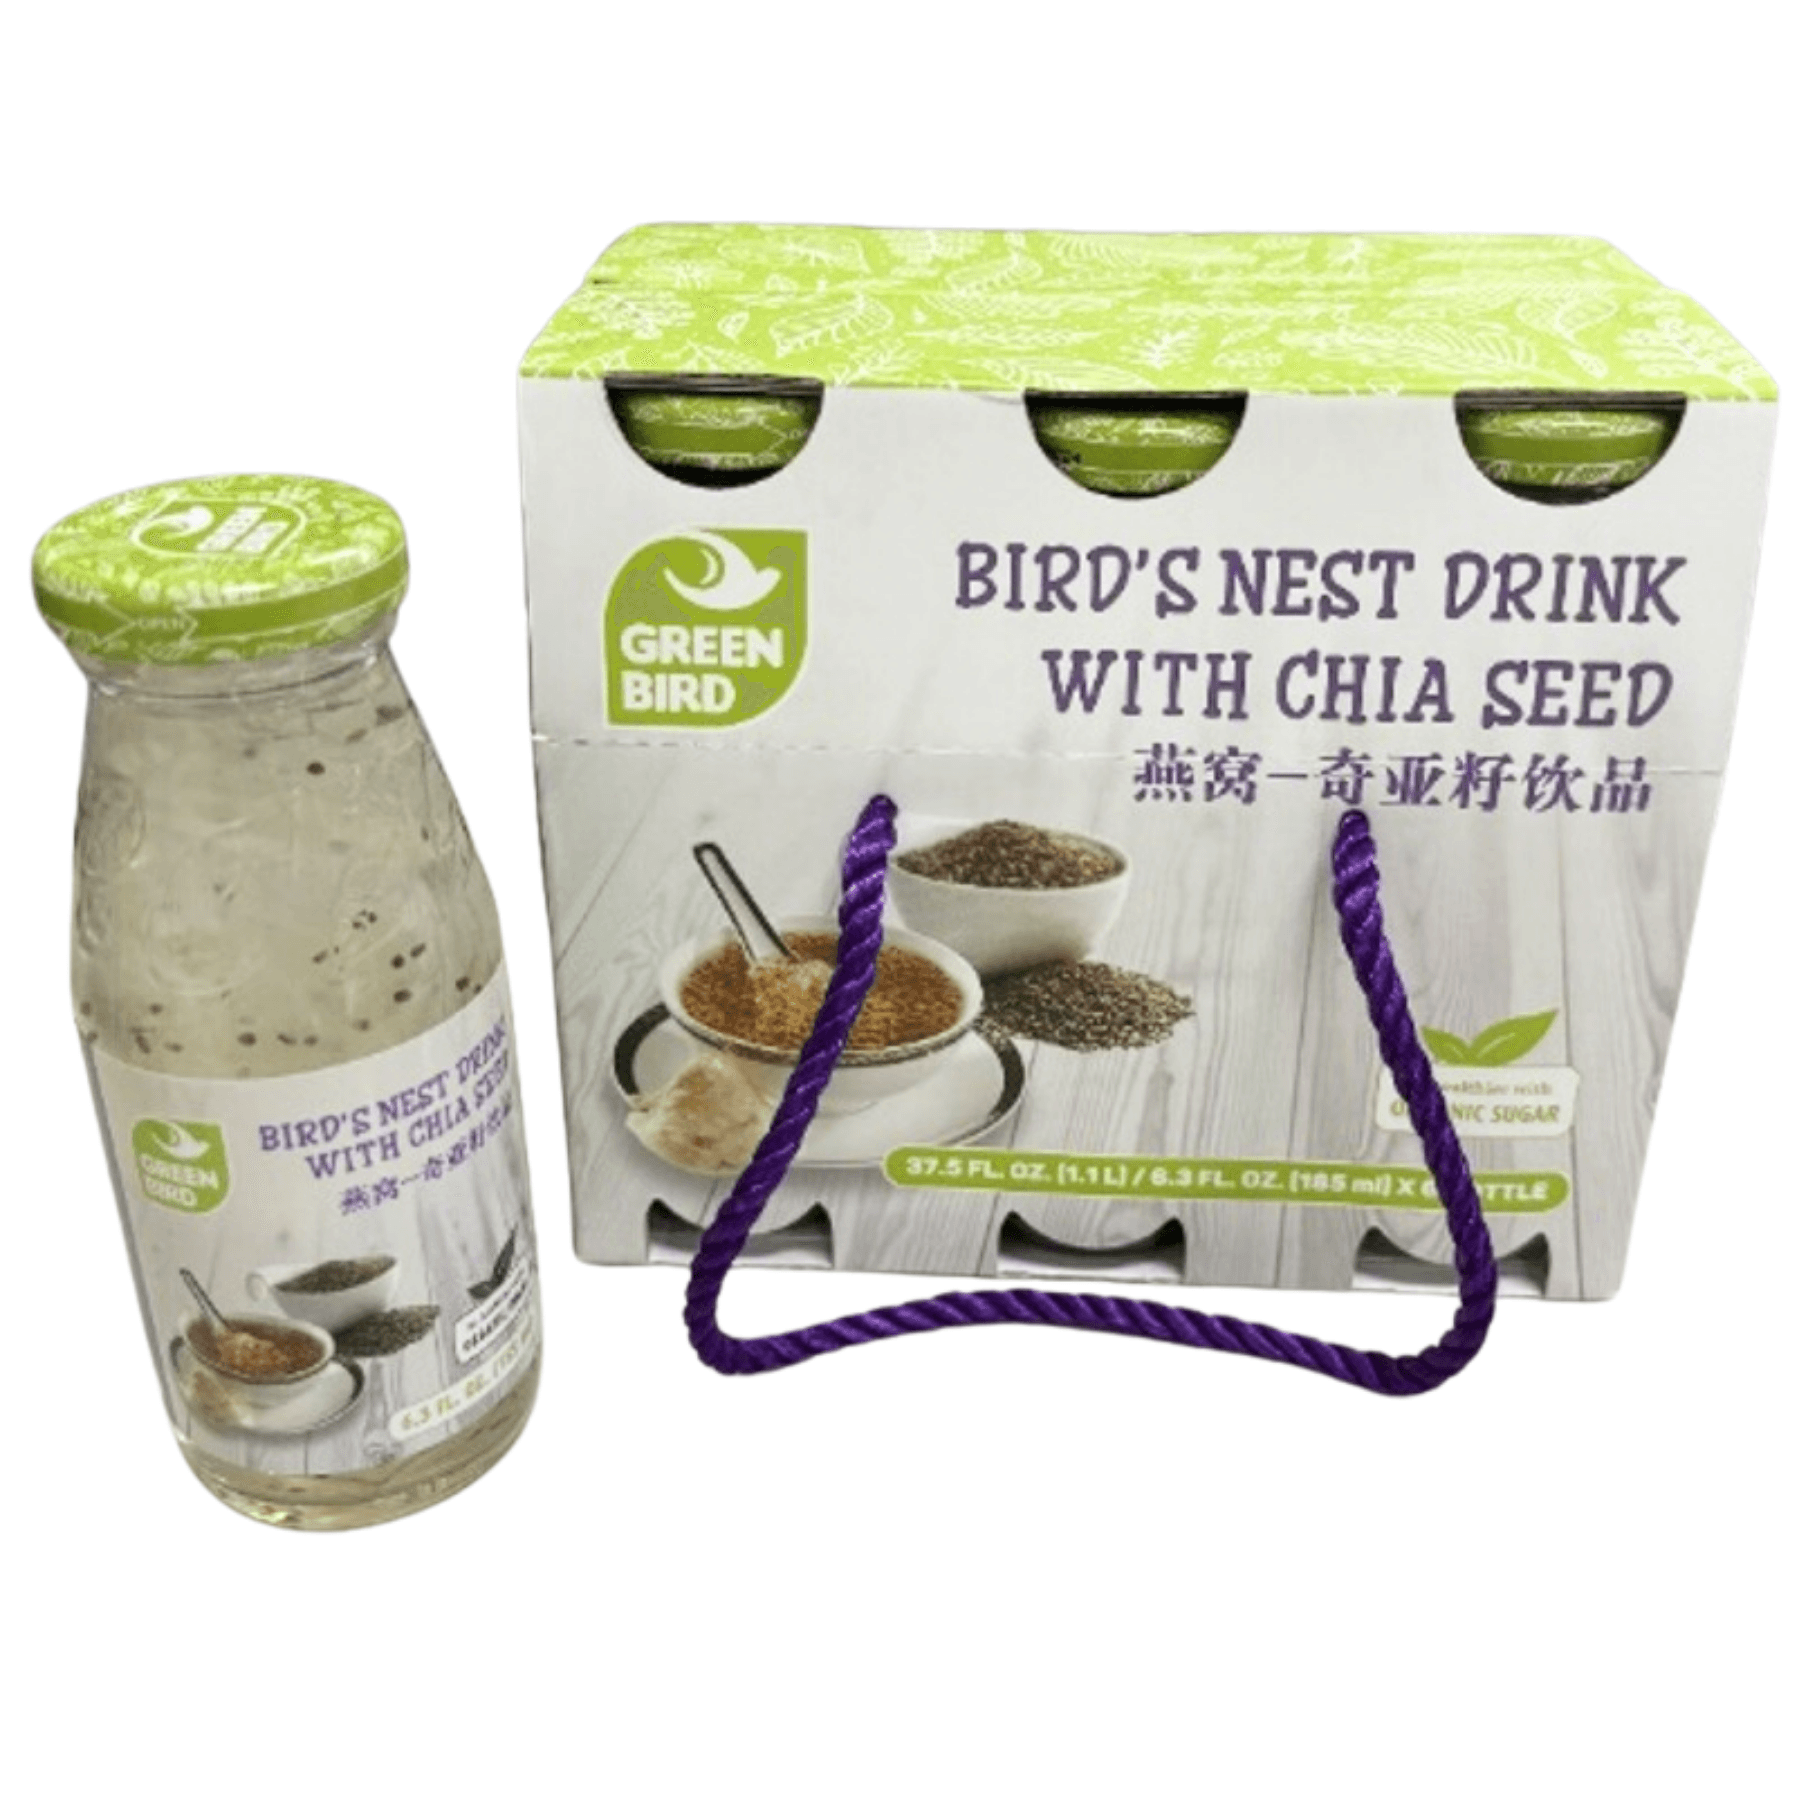 Green Bird’S Nest Drink With Chia Seed * 185ML x 6